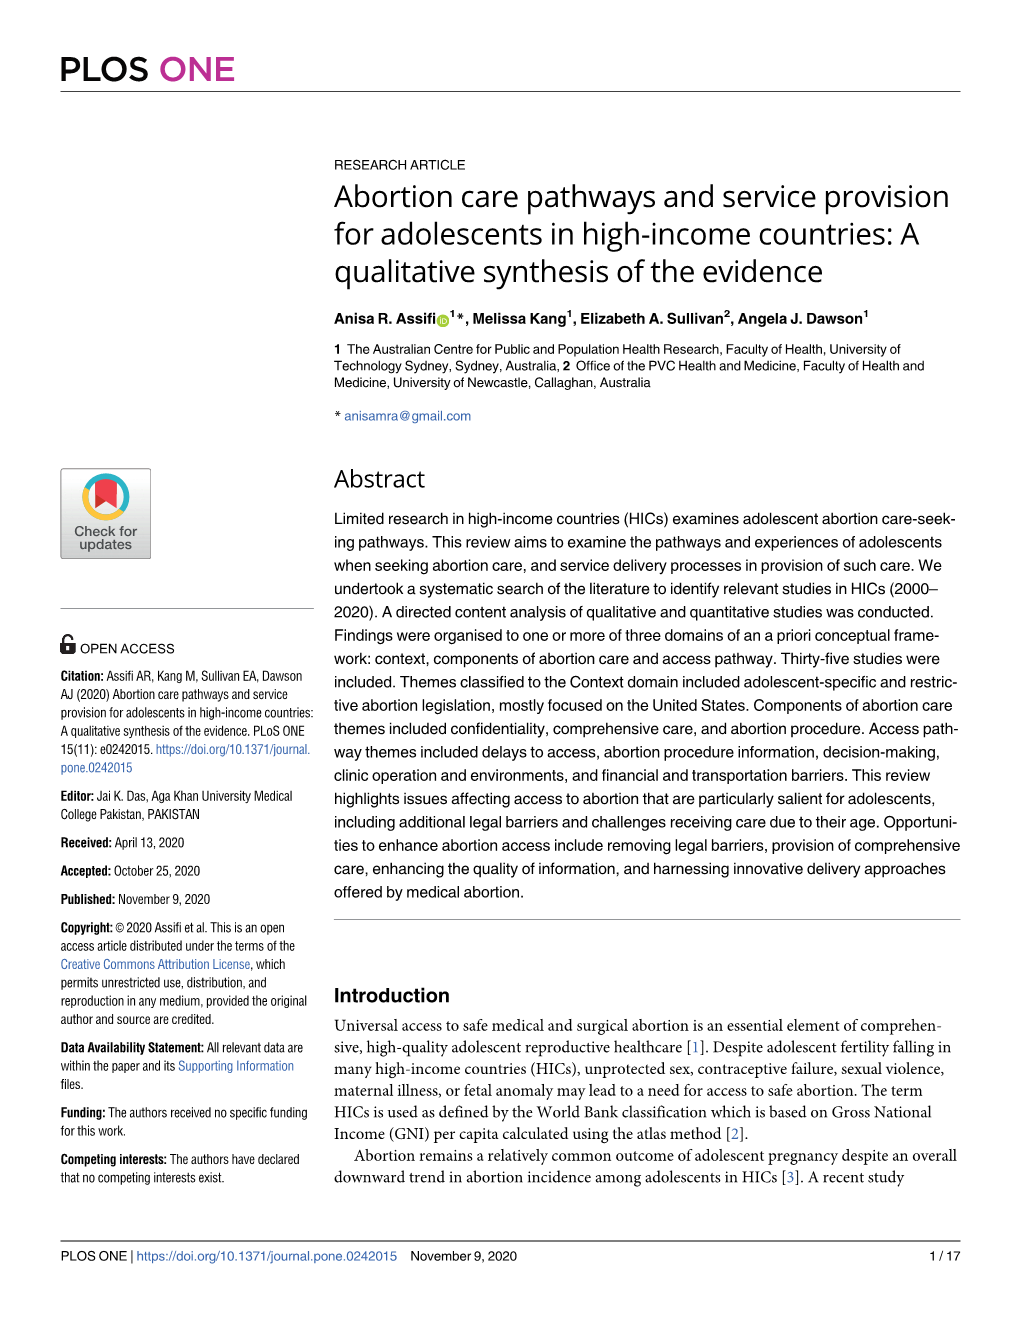 Abortion Care Pathways and Service Provision for Adolescents in High-Income Countries: a Qualitative Synthesis of the Evidence